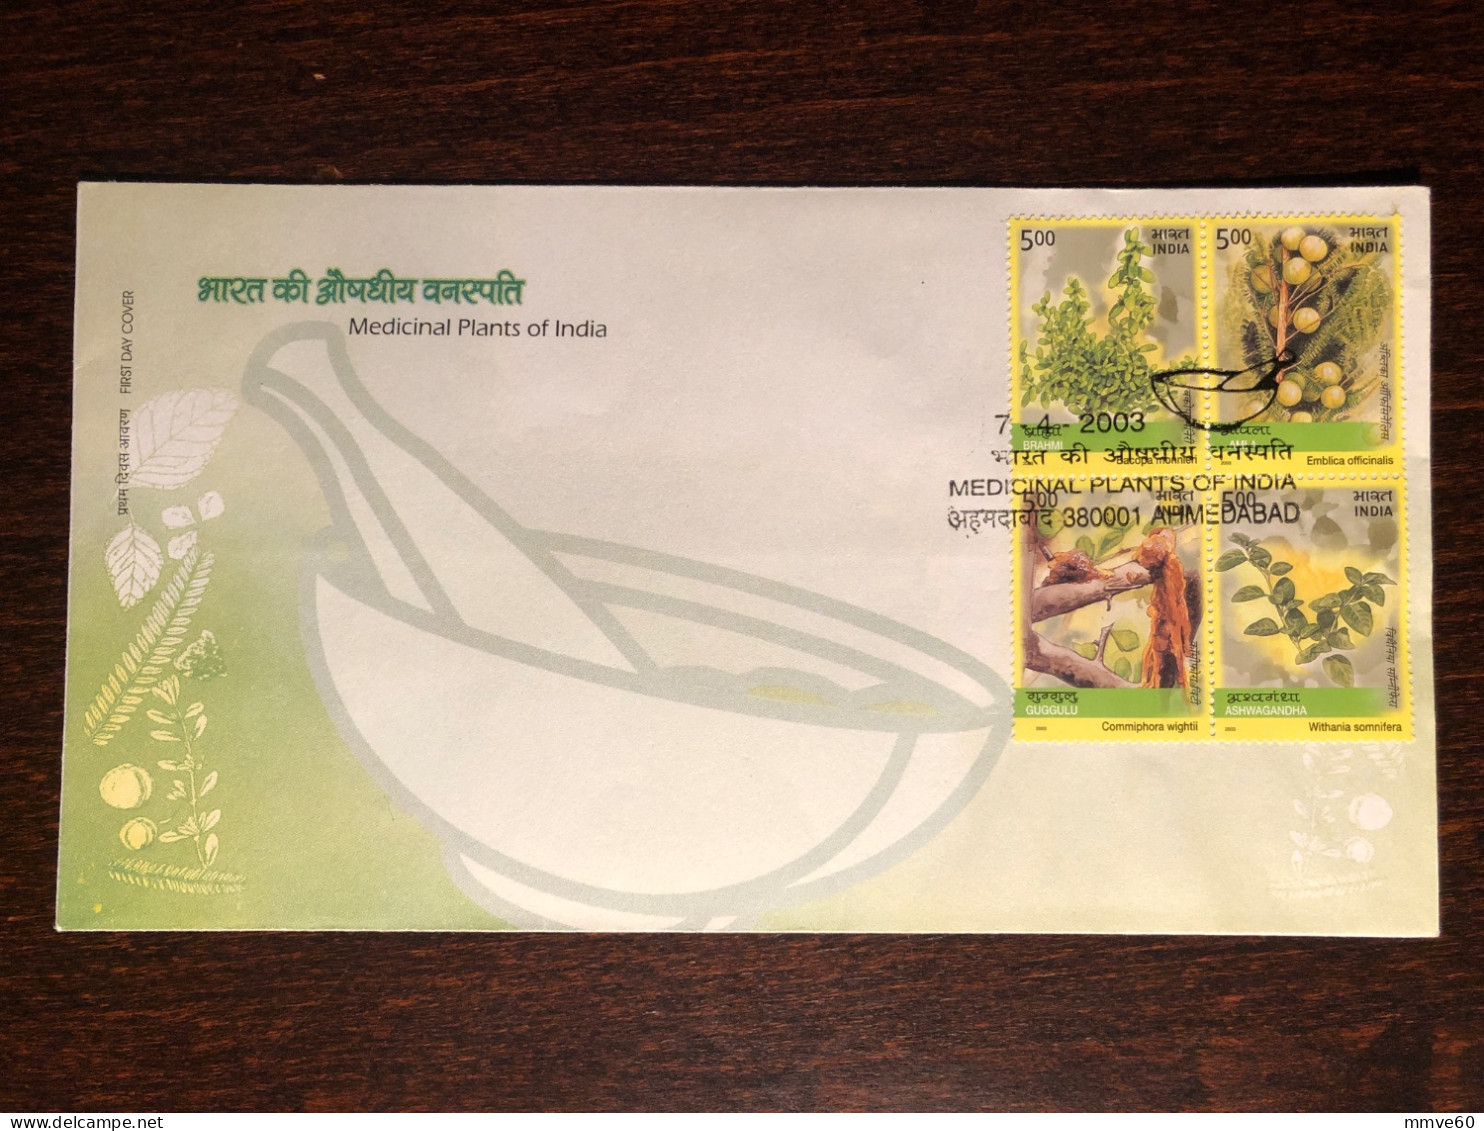 INDIA FDC COVER 2003 YEAR MEDICINES PLANTS HERBS HEALTH MEDICINE STAMPS - Covers & Documents